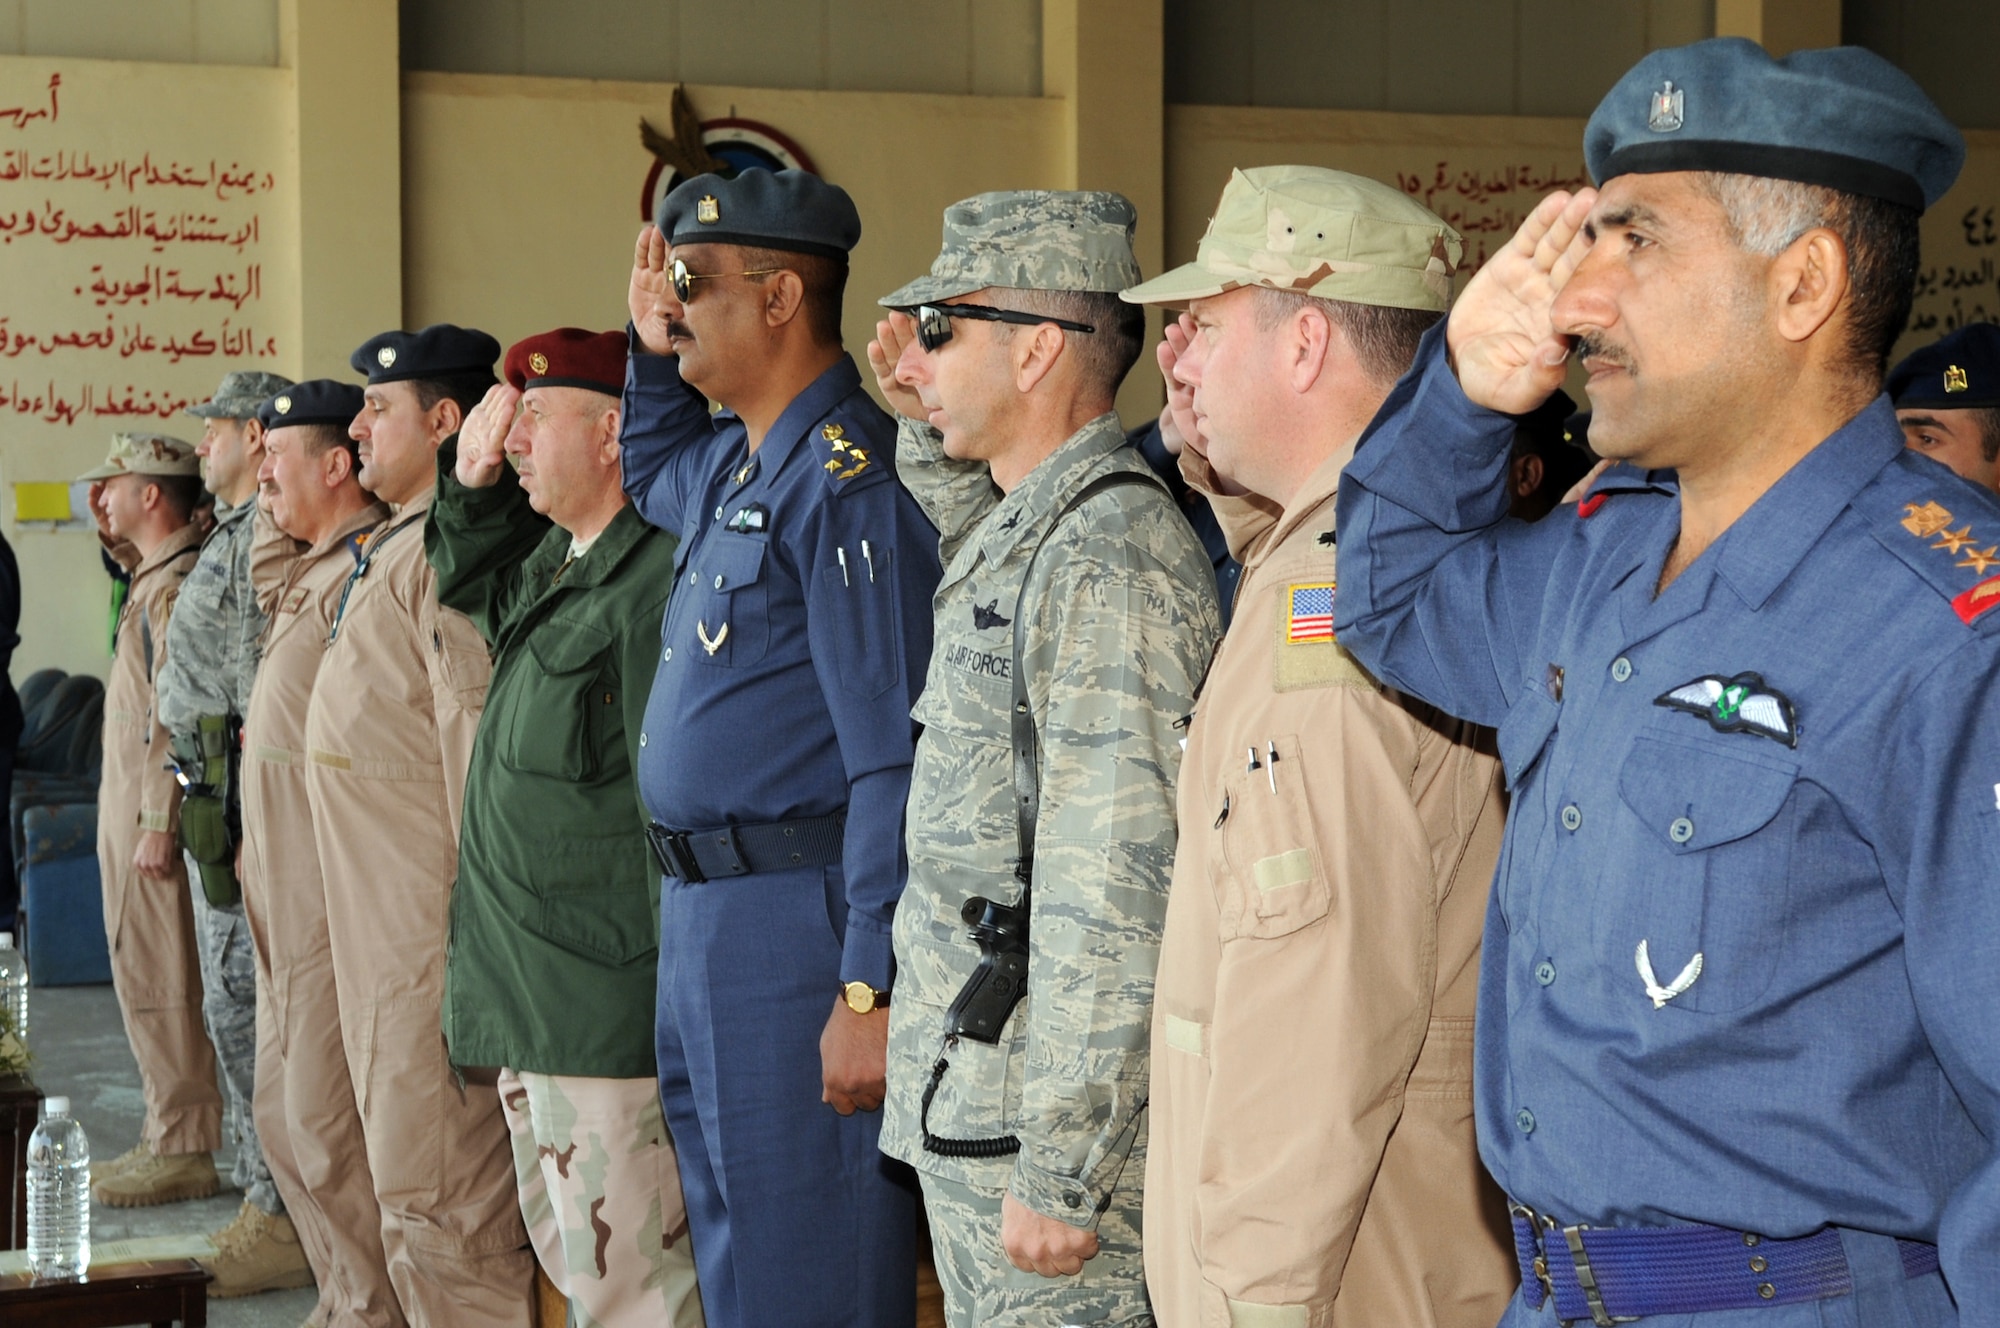 Leaders from the 521st Air Expeditionary Advisory Squadron, 321st Air Expeditionary Advisory Group and Iraqi air force Squadrons 1 and 3 salute both countries' national anthems Jan. 11, 2010, at Kirkuk Air Base, Iraq. (U.S. Air Force photo/Staff Sgt. Tabitha Kuykendall)